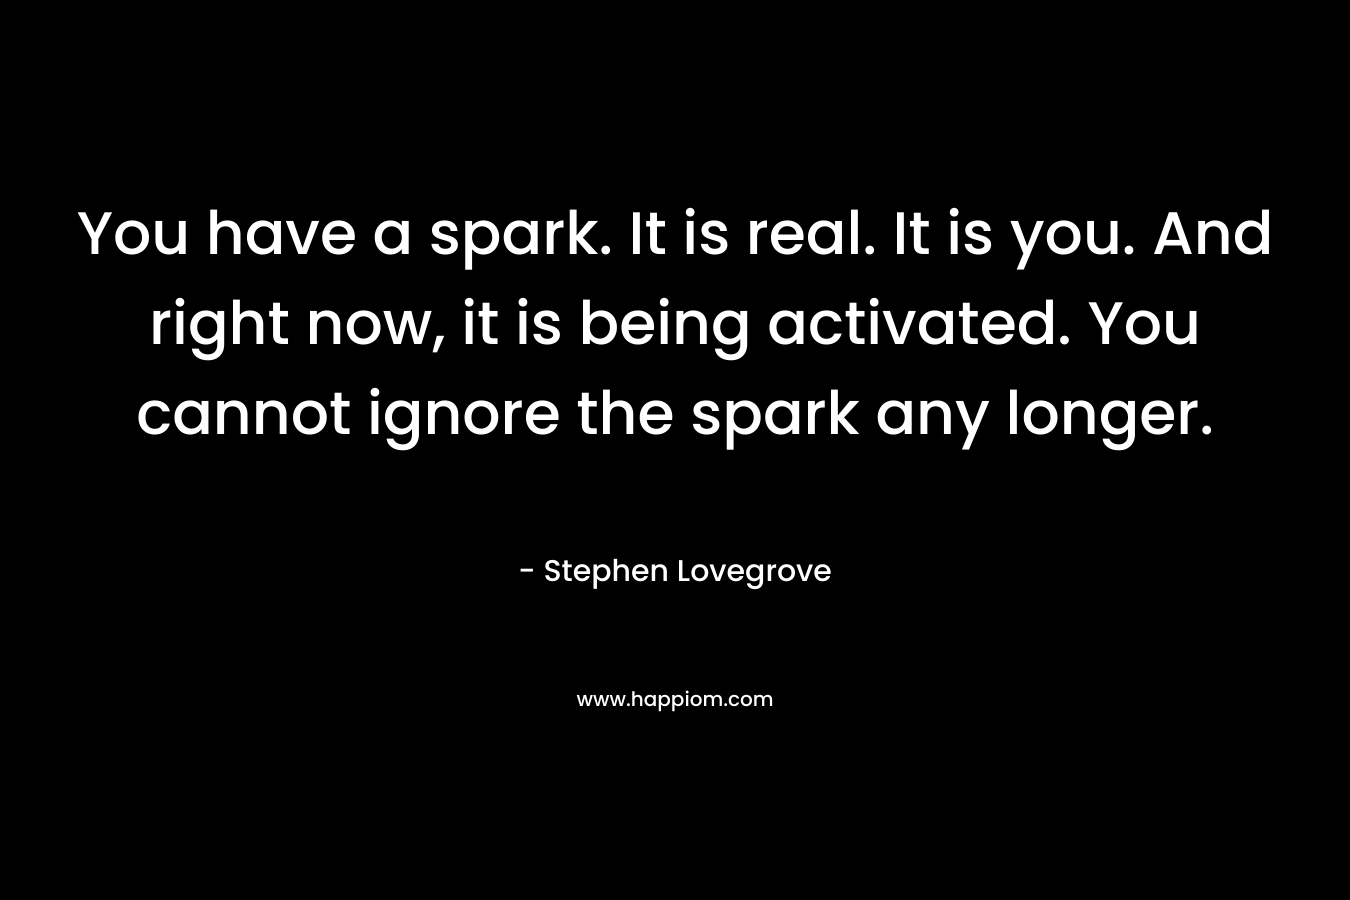 You have a spark. It is real. It is you. And right now, it is being activated. You cannot ignore the spark any longer. – Stephen Lovegrove